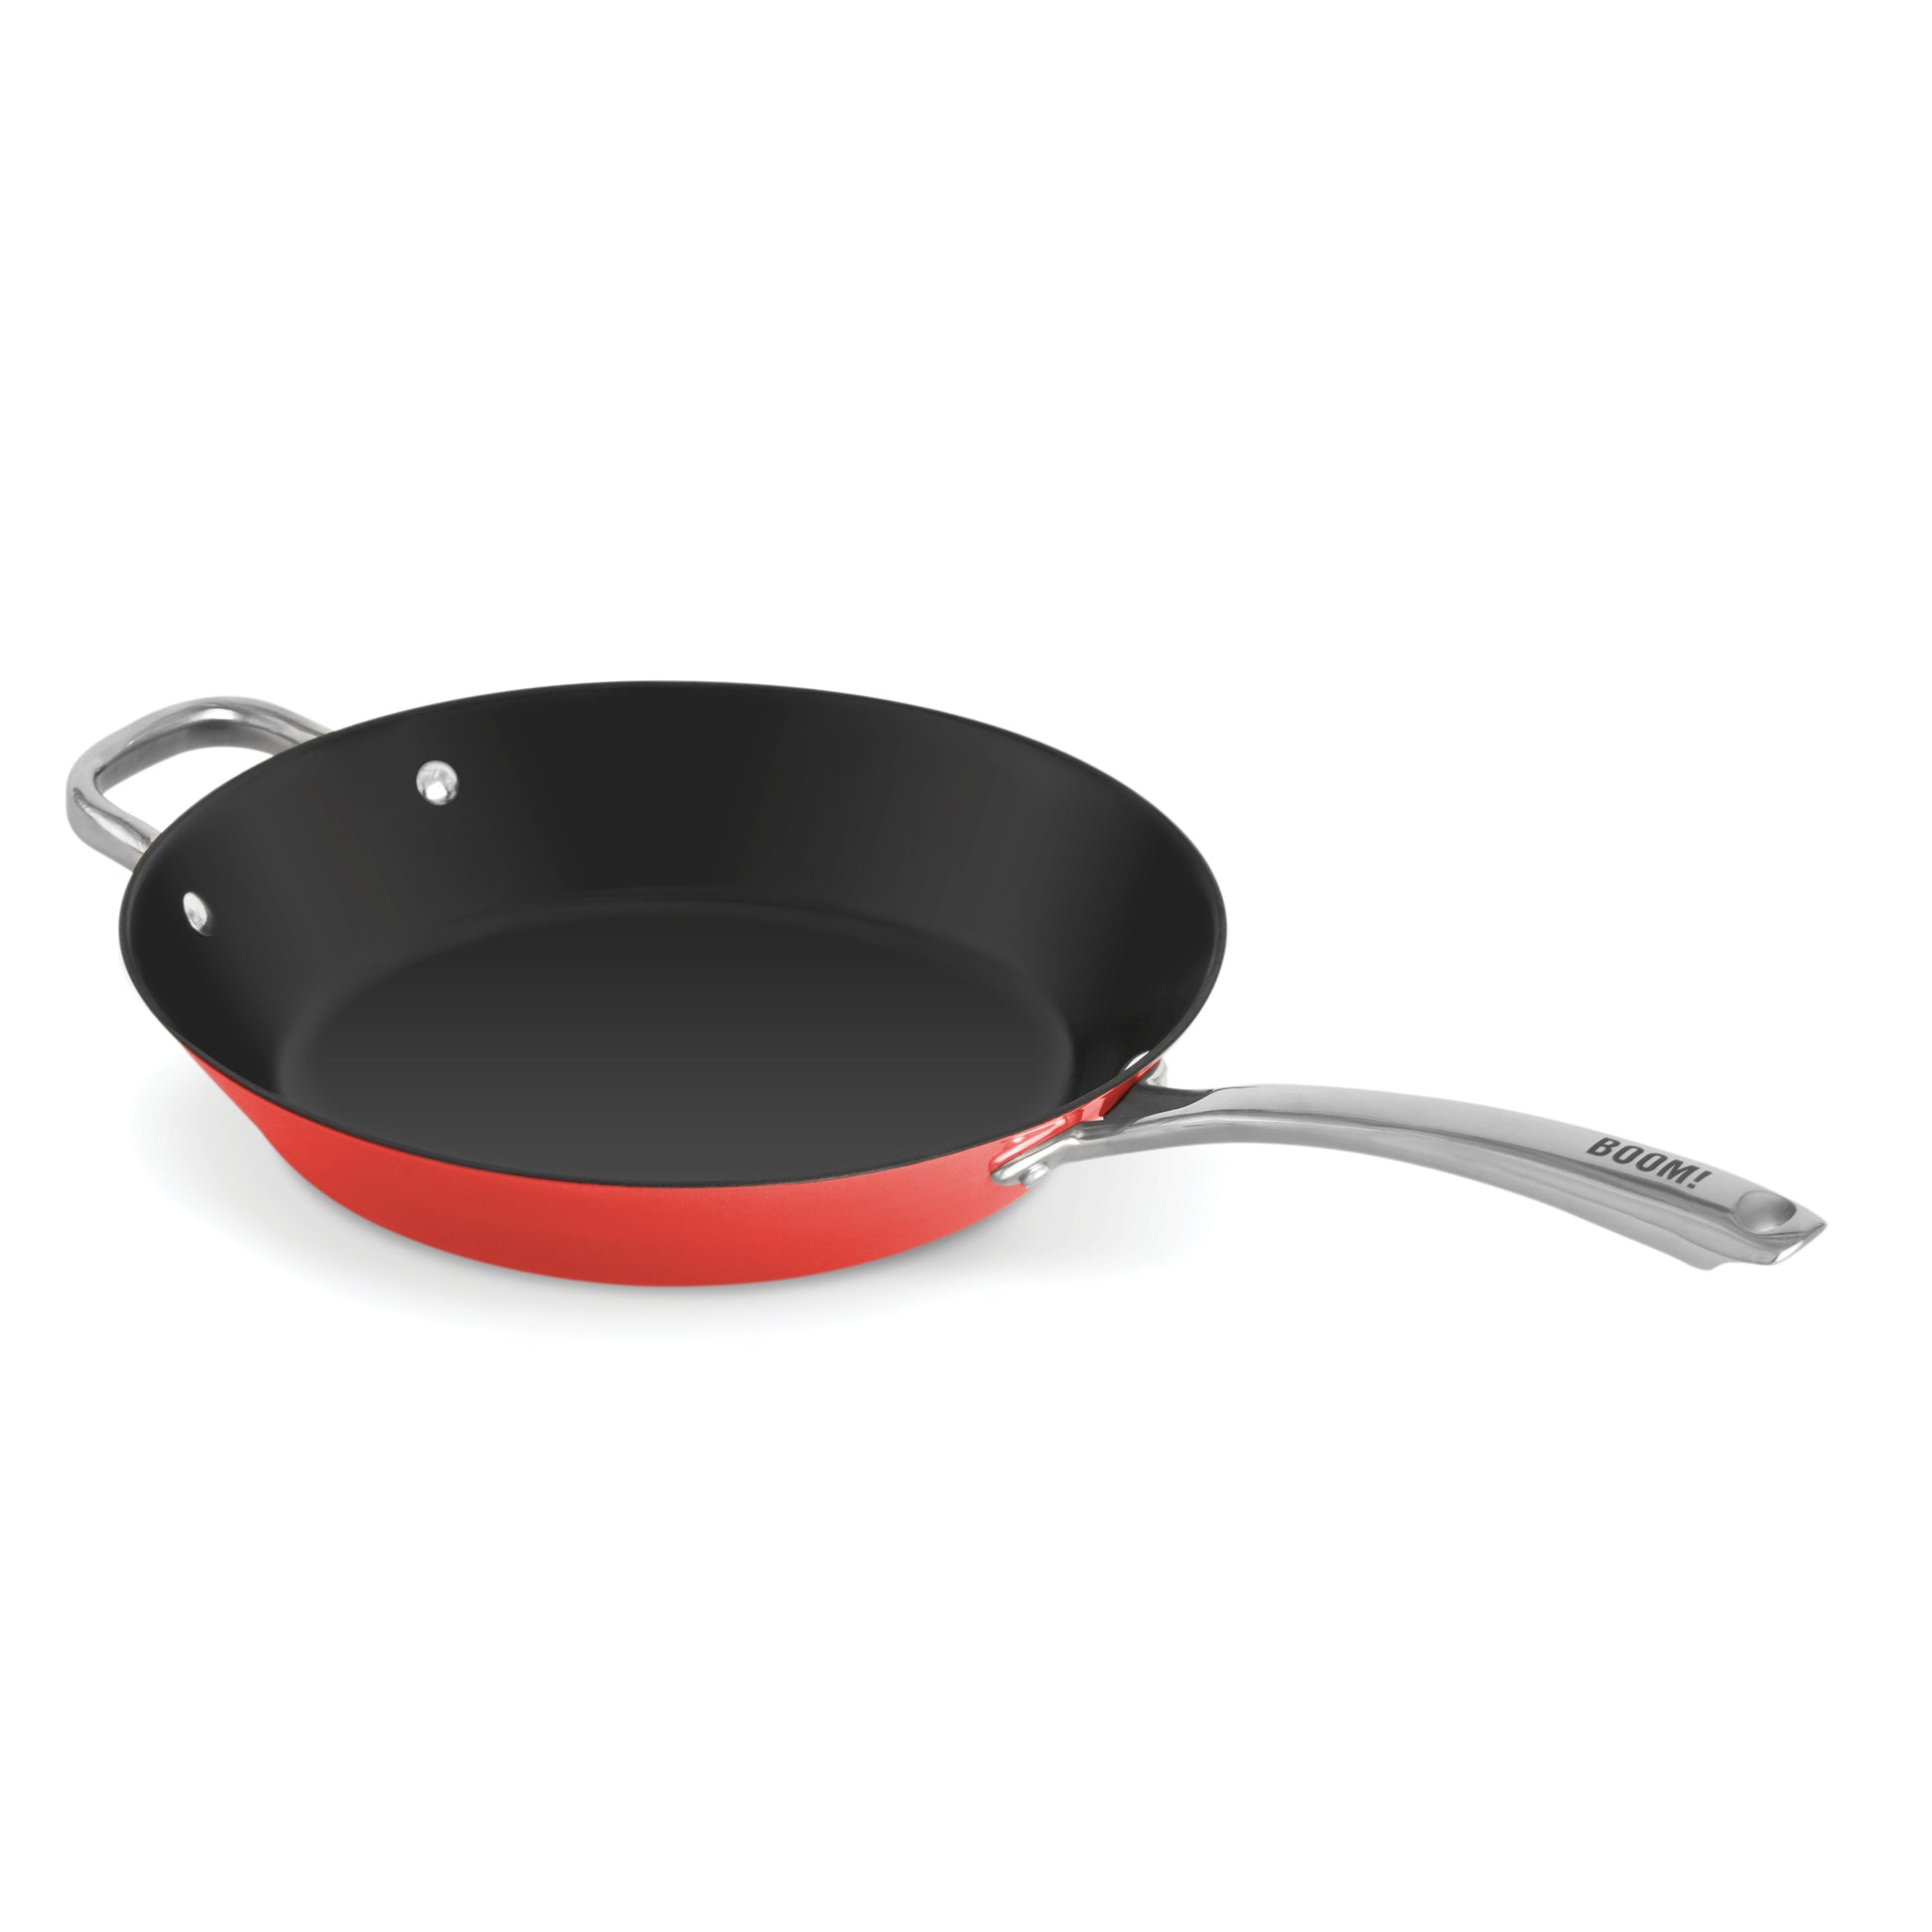 Carbon Steel Fry Pan cookware The Fit Cook x Dash Sriracha 12" 